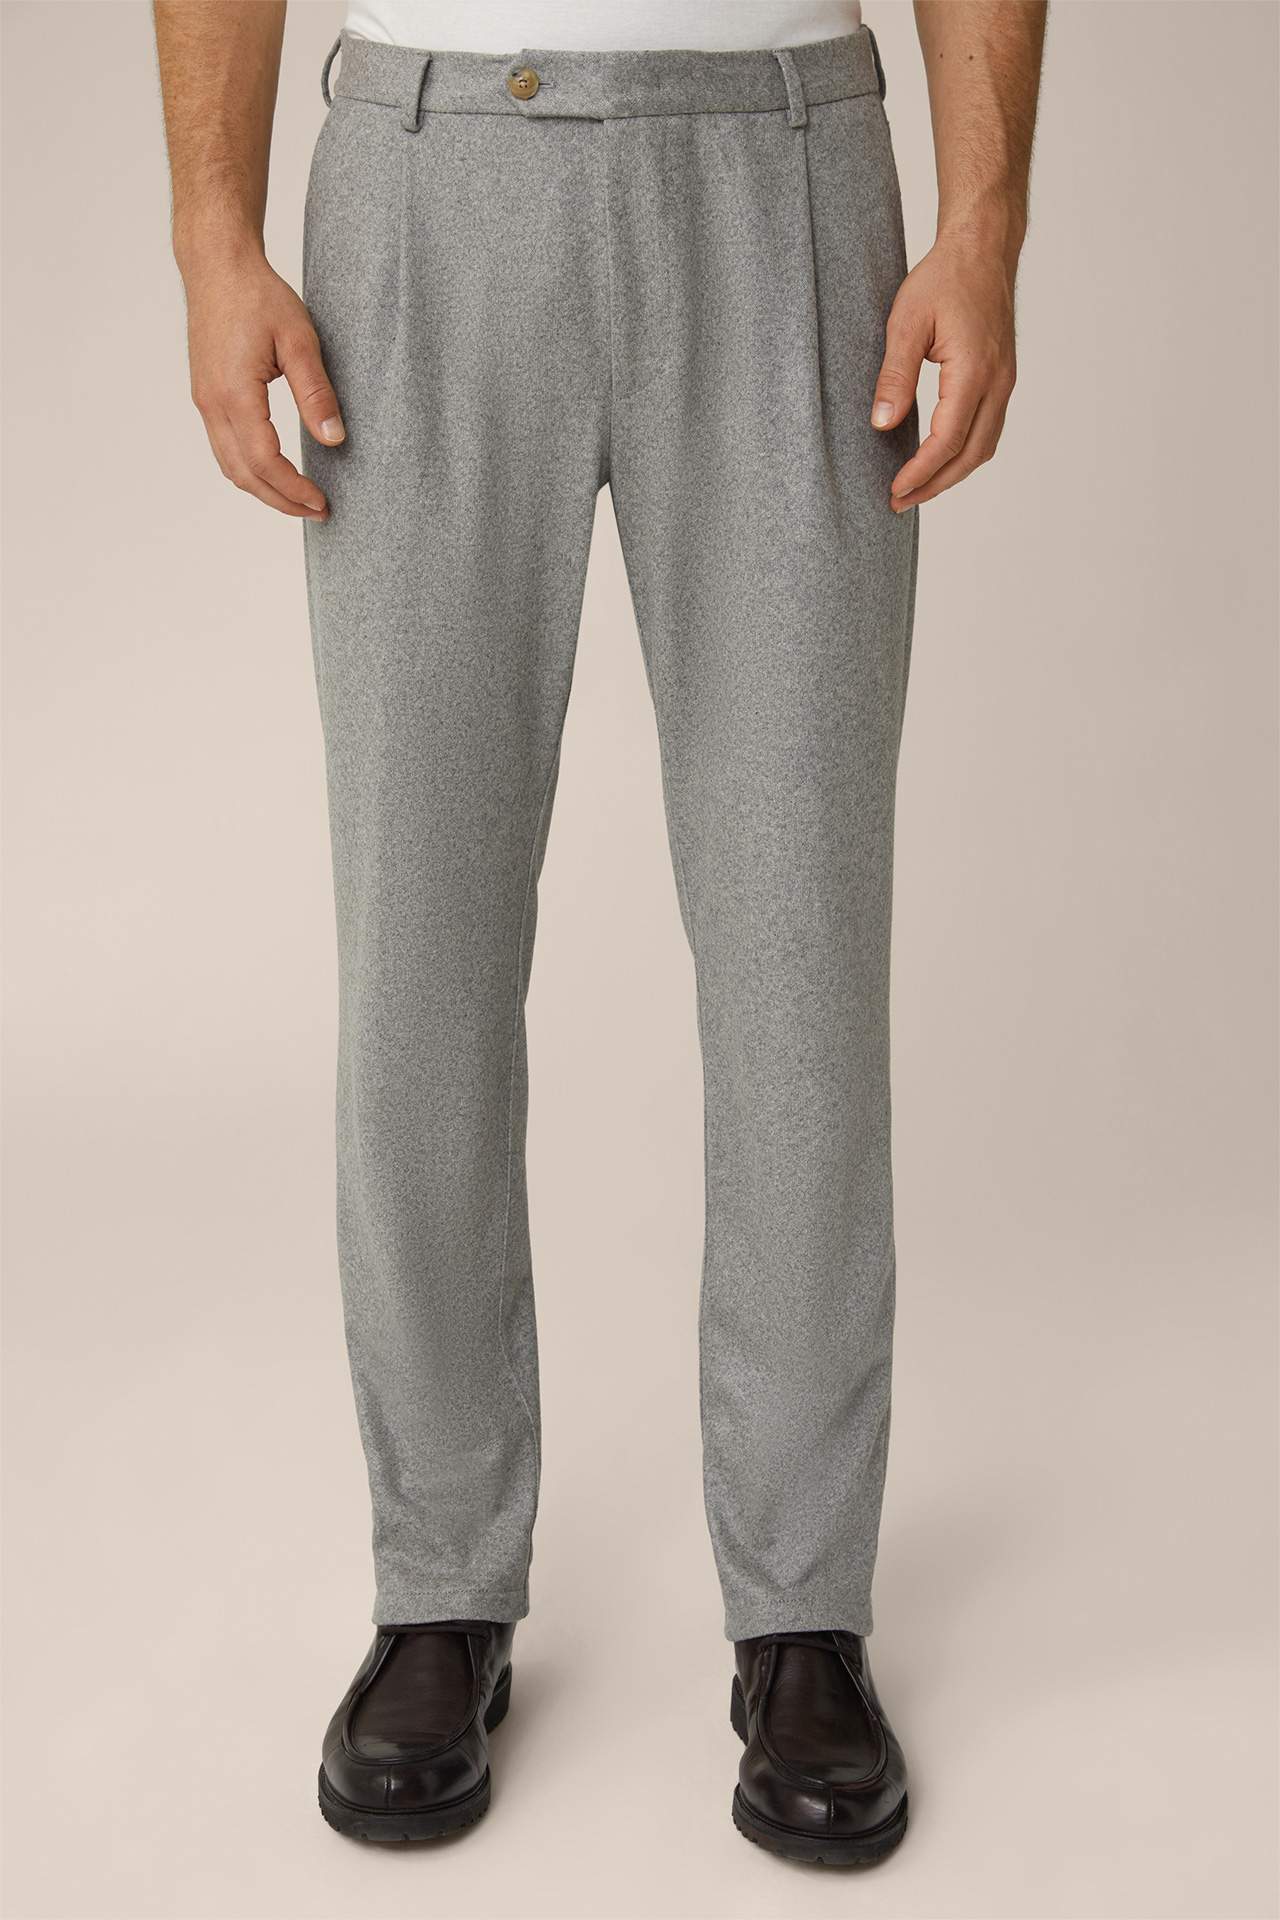 Floro Cashmere Modular Trousers with Pleats in Silver Marl